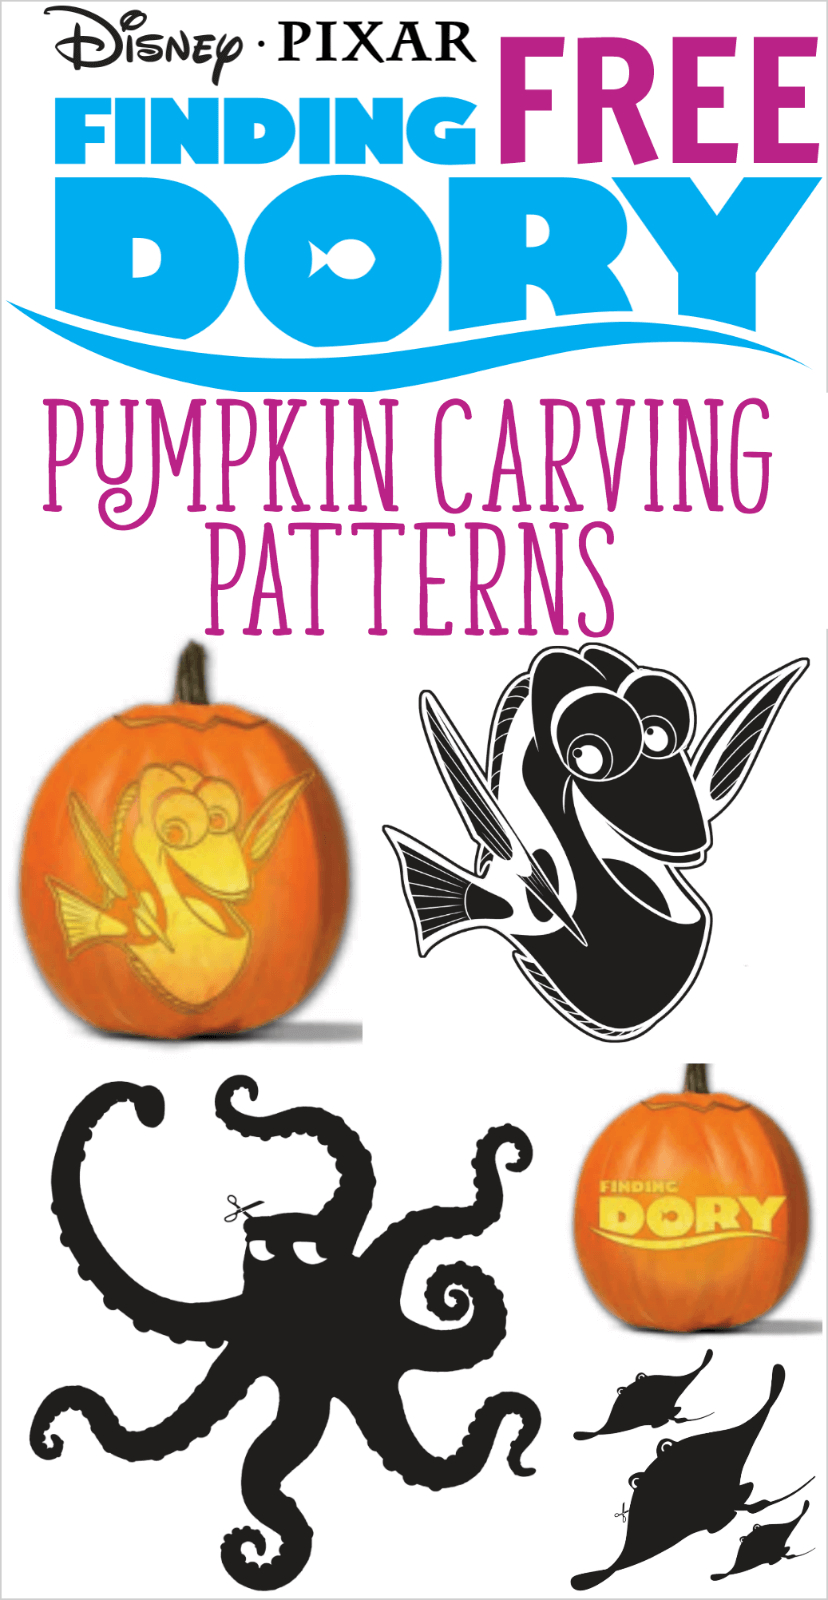 Free Finding Dory Pumpkin Carving Patterns To Print! | All Things - Free Pumpkin Carving Patterns Disney Printable